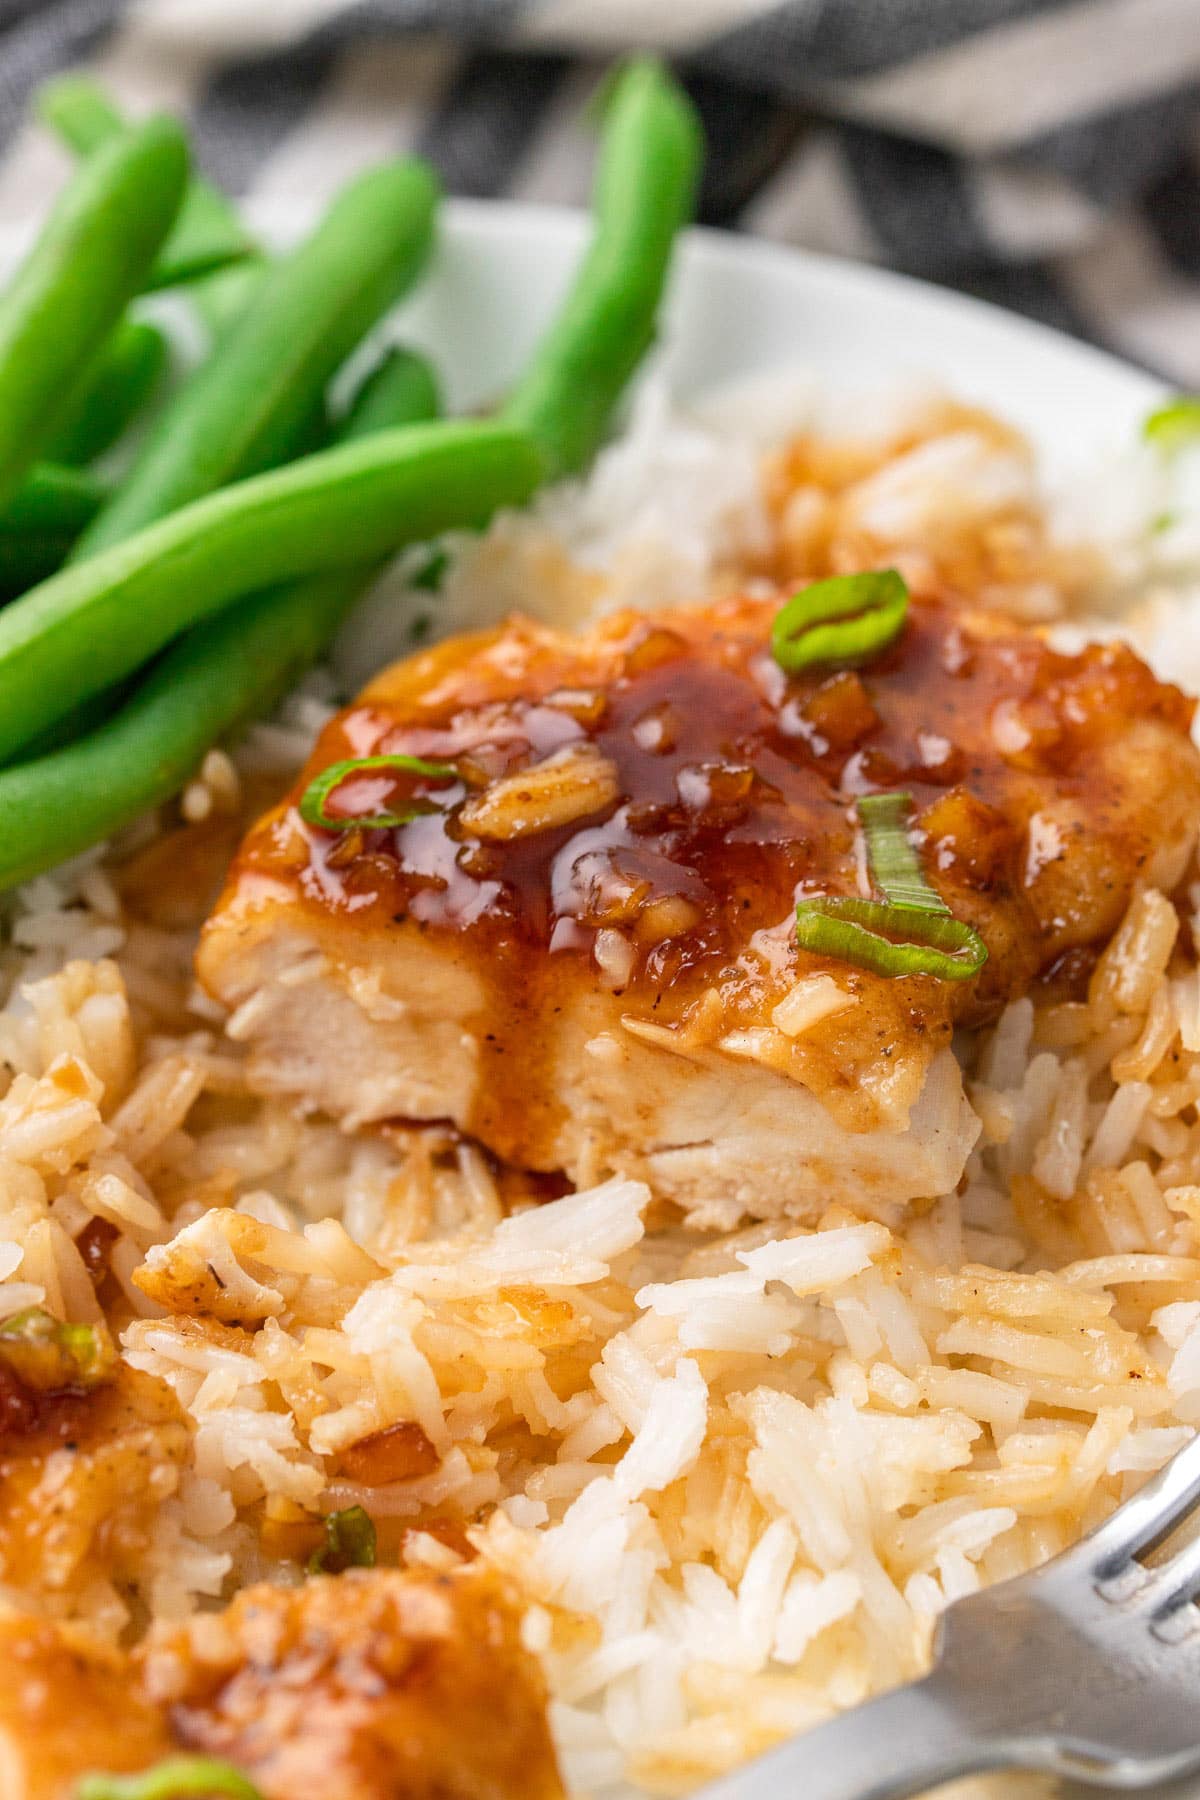 Honey garlic butter chicken on a bed of white rice with green beans.